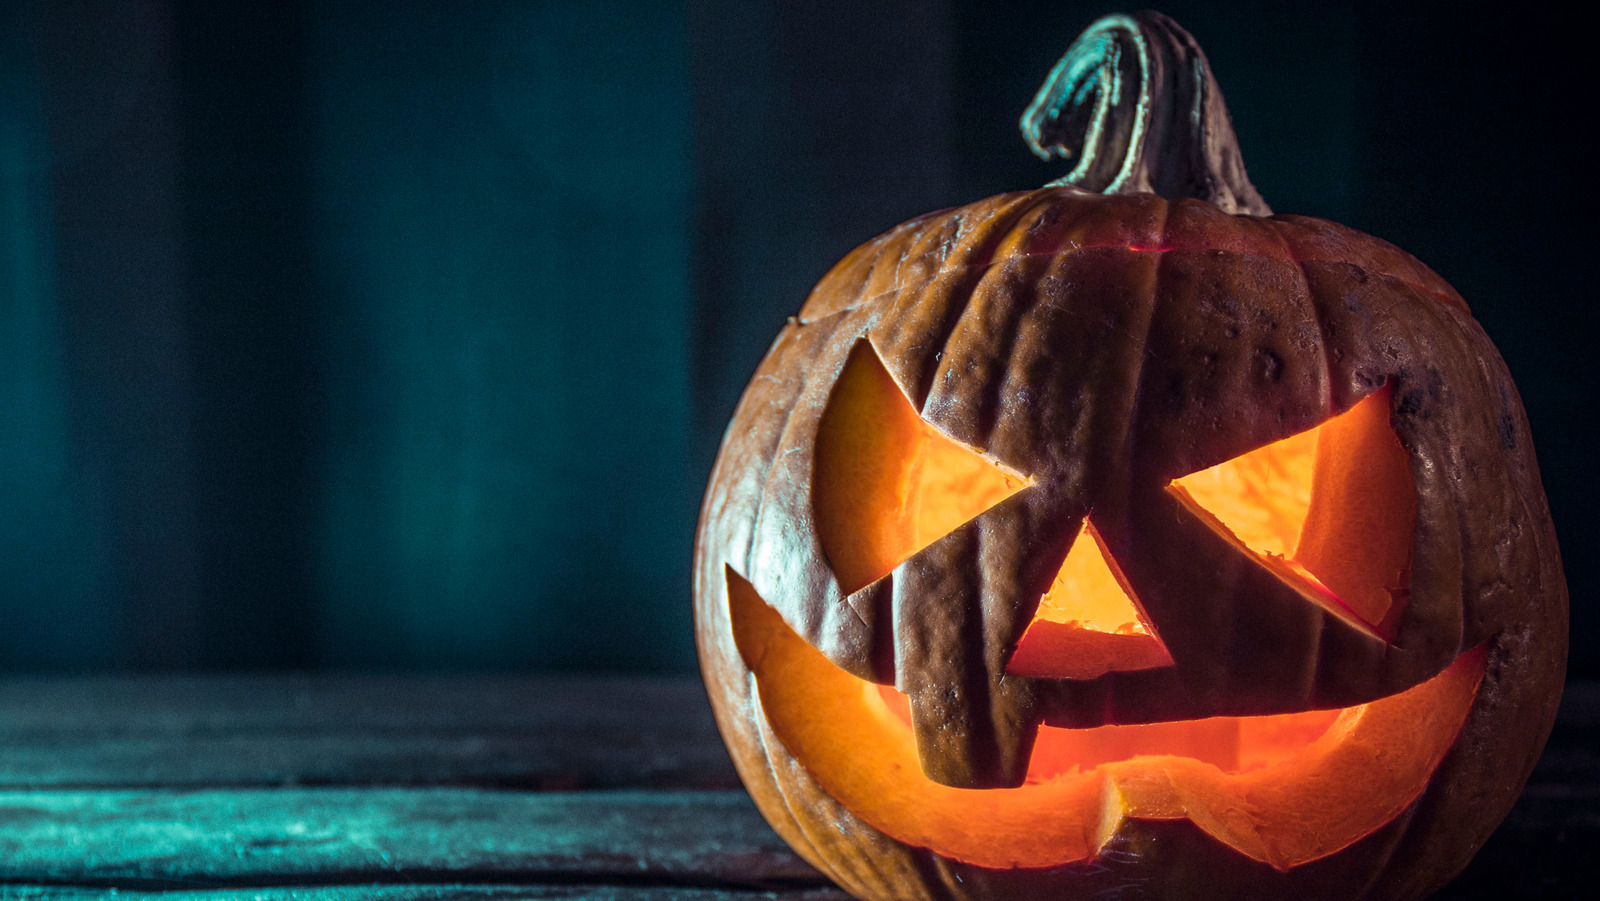 Here's Why You Should Never Use A Kitchen Knife To Carve A Pumpkin